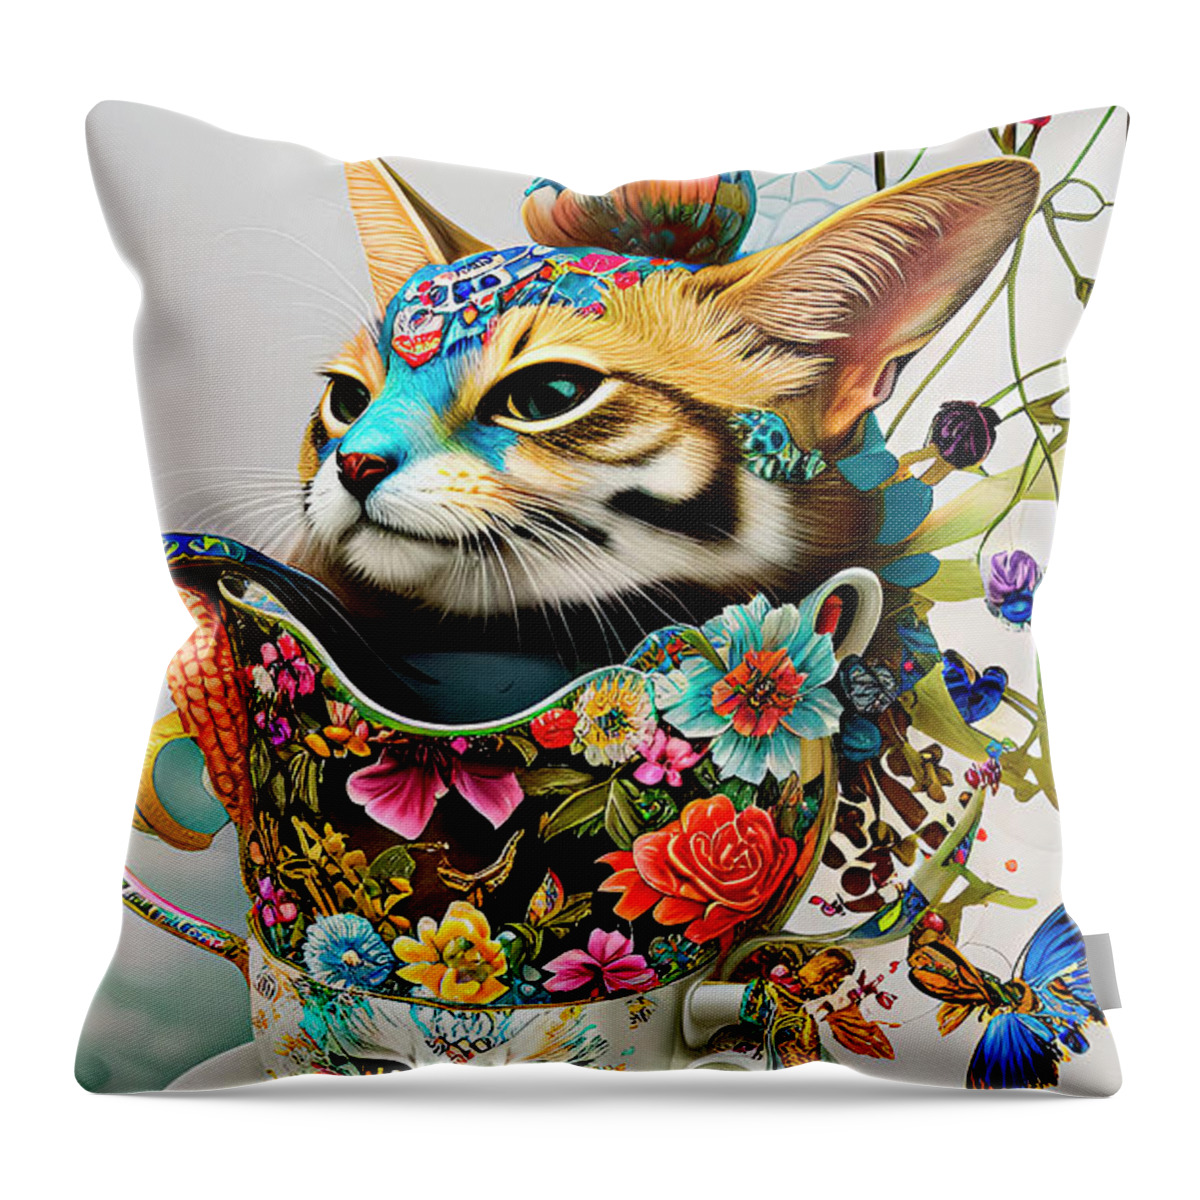 Digital Art Throw Pillow featuring the digital art Cats in A Cup 2 Ginette In Wonderland Decorative Art by Ginette Callaway